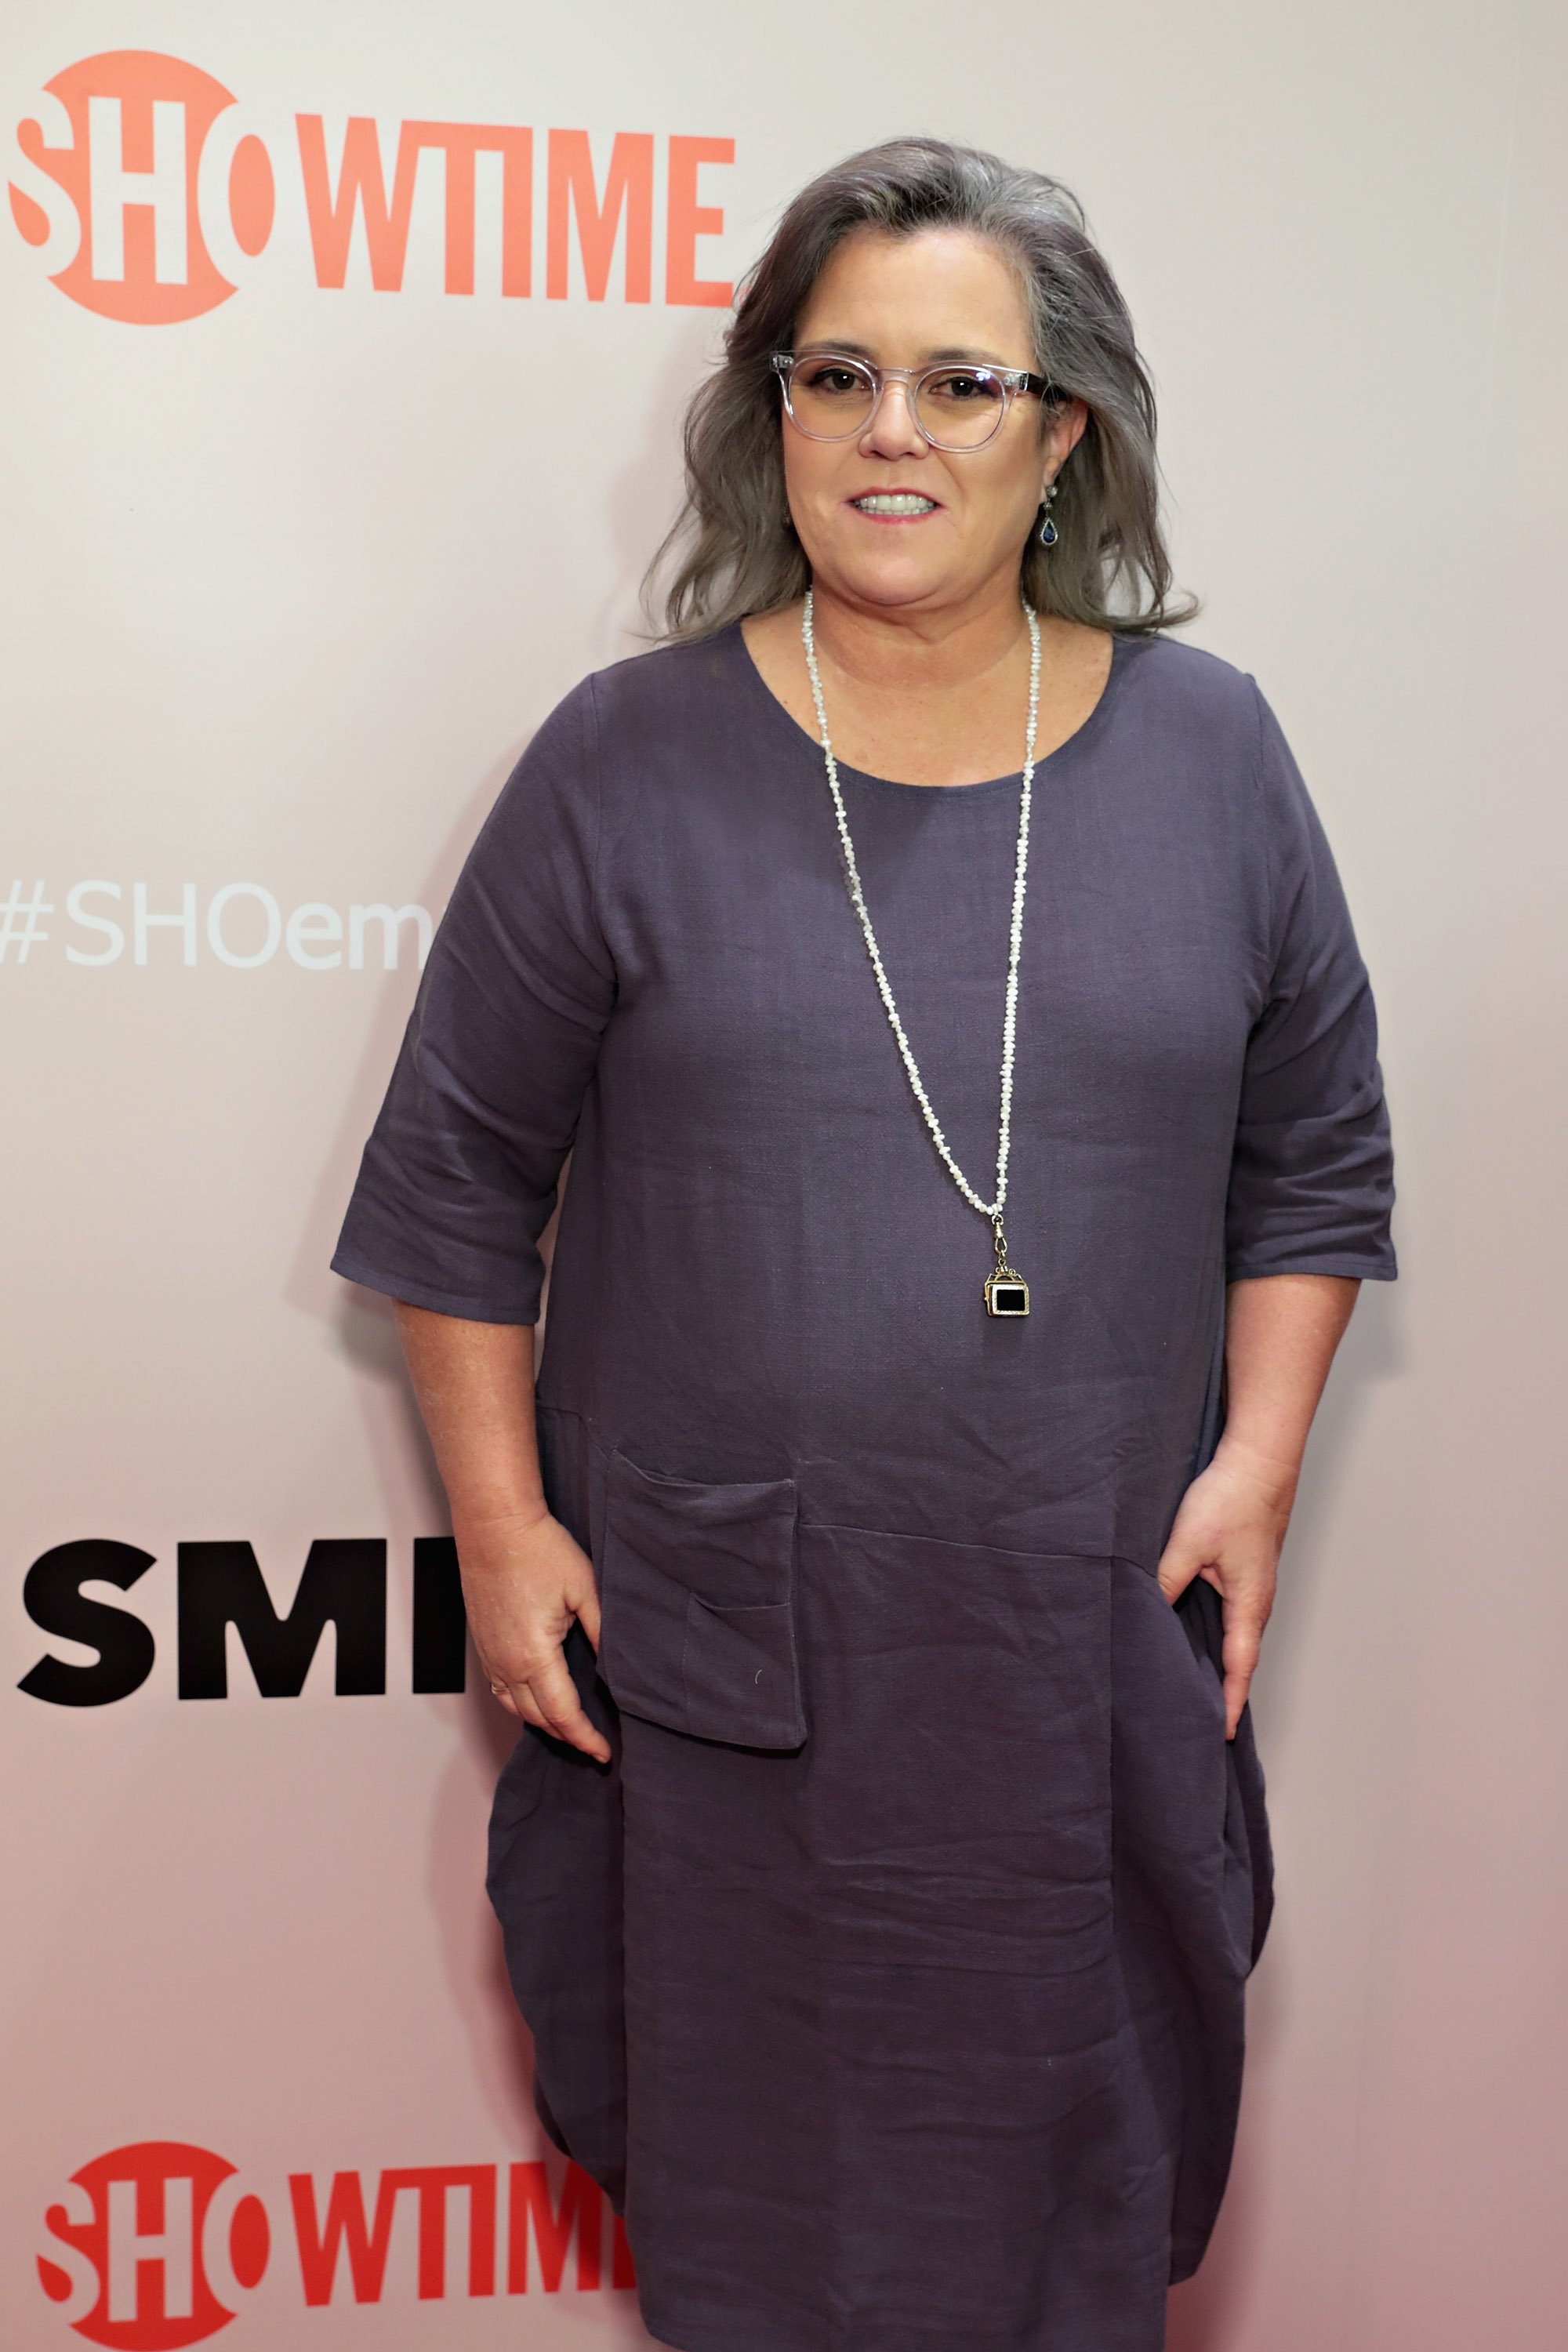 Rosie O'Donnell attends the Showtime Emmy FYC Screening Of SMILF at The Whitney in 2018 | Photo: Getty Images